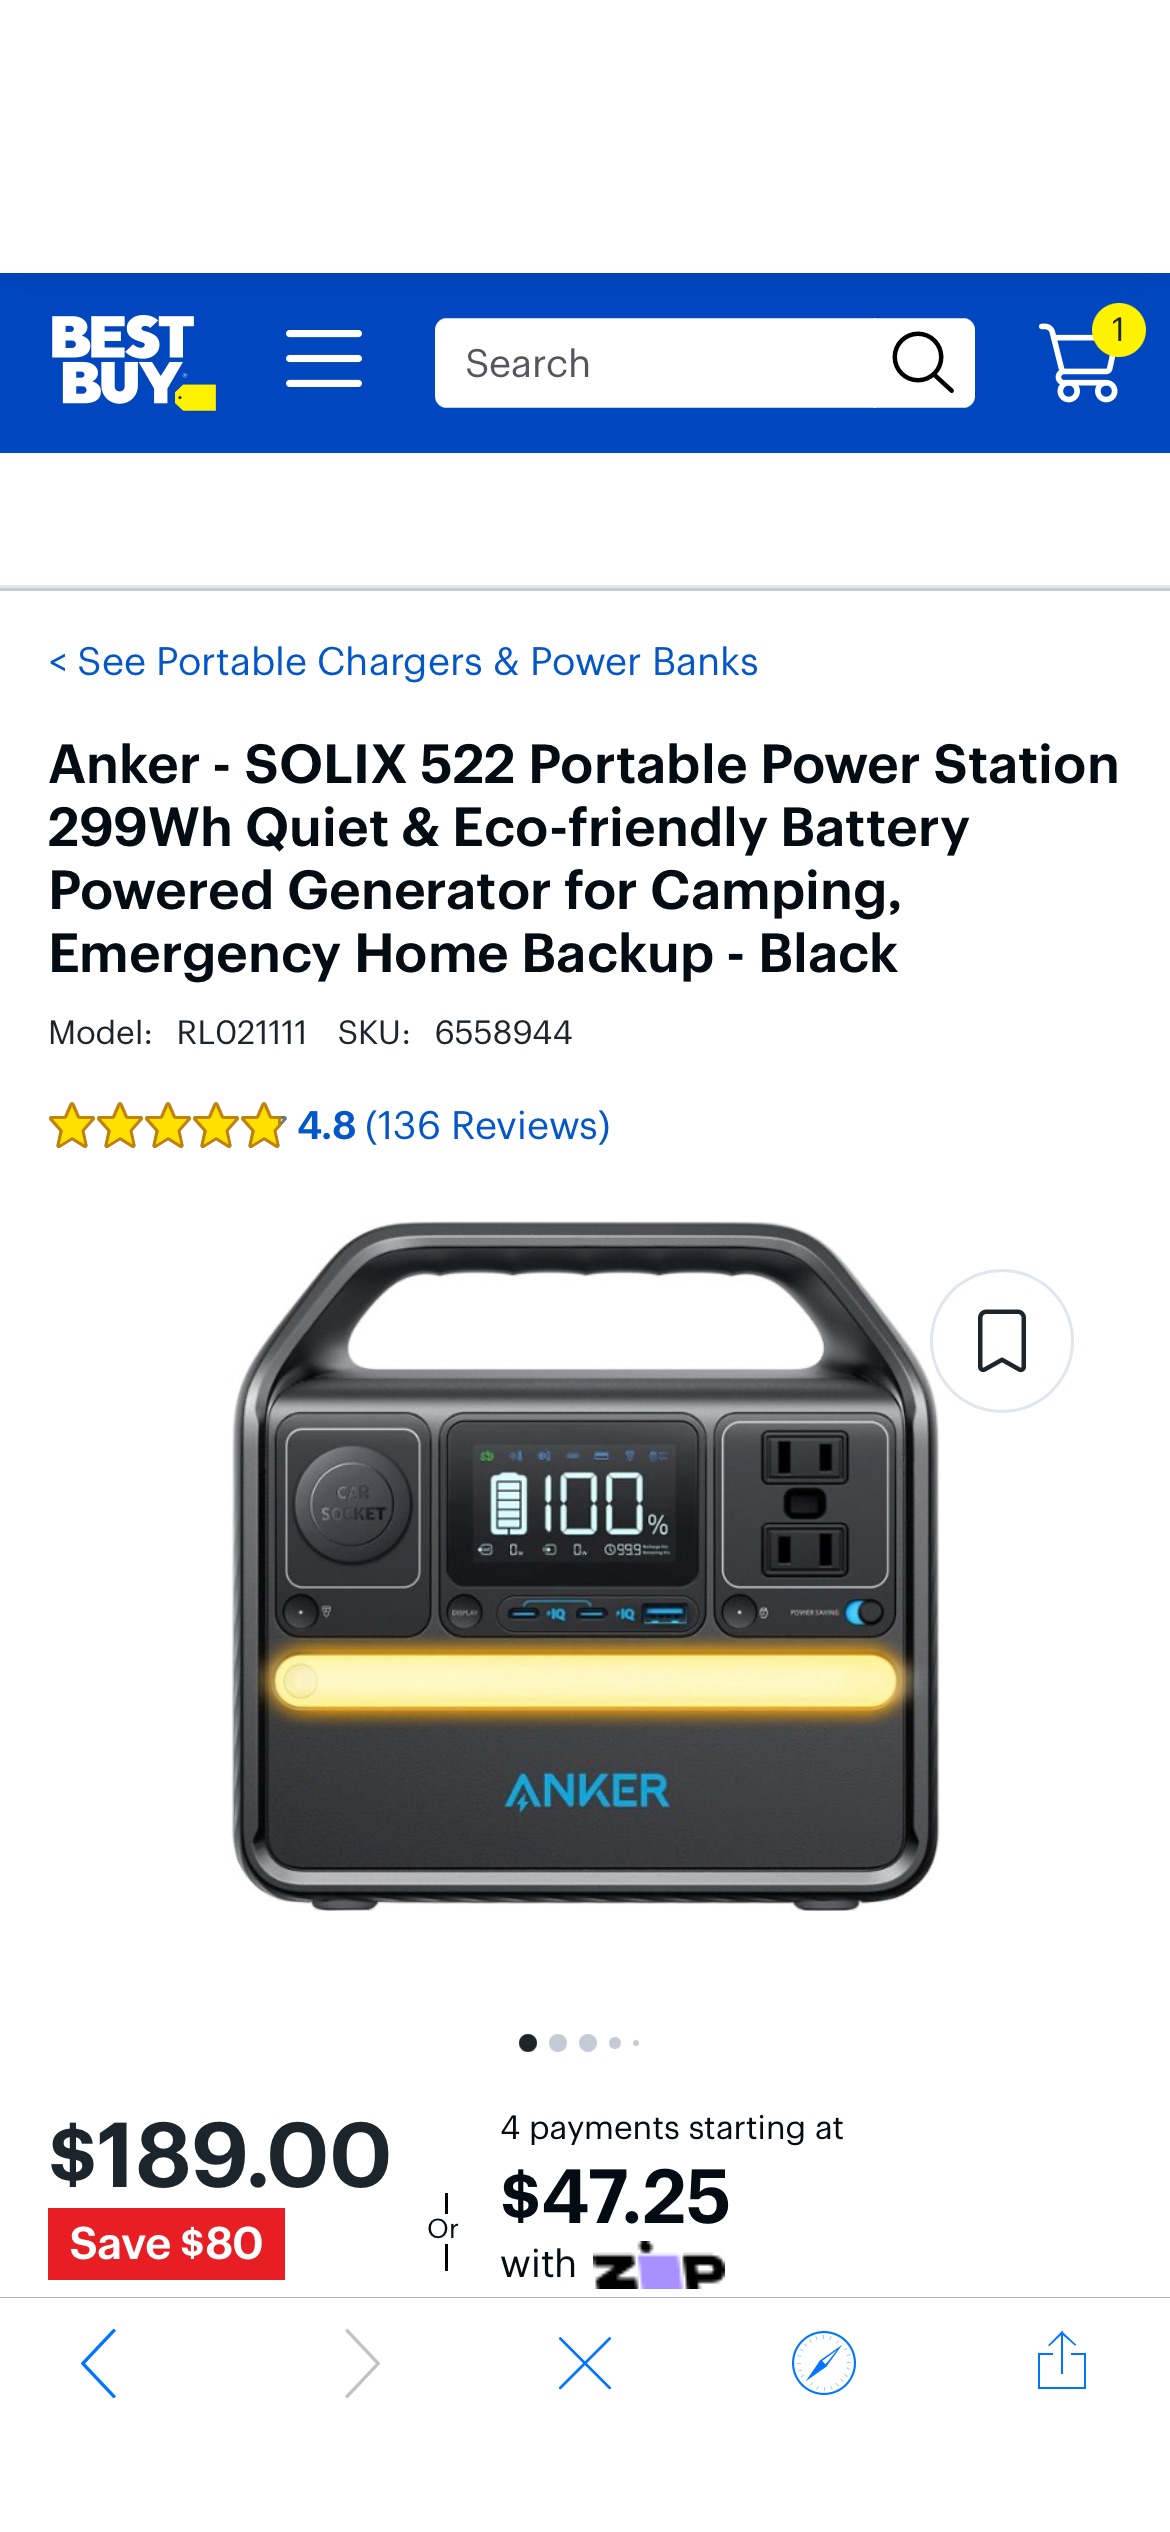 Anker SOLIX 522 Portable Power Station 299Wh Quiet & Eco-friendly Battery Powered Generator for Camping, Emergency Home Backup Black RL021111 - Best Buy